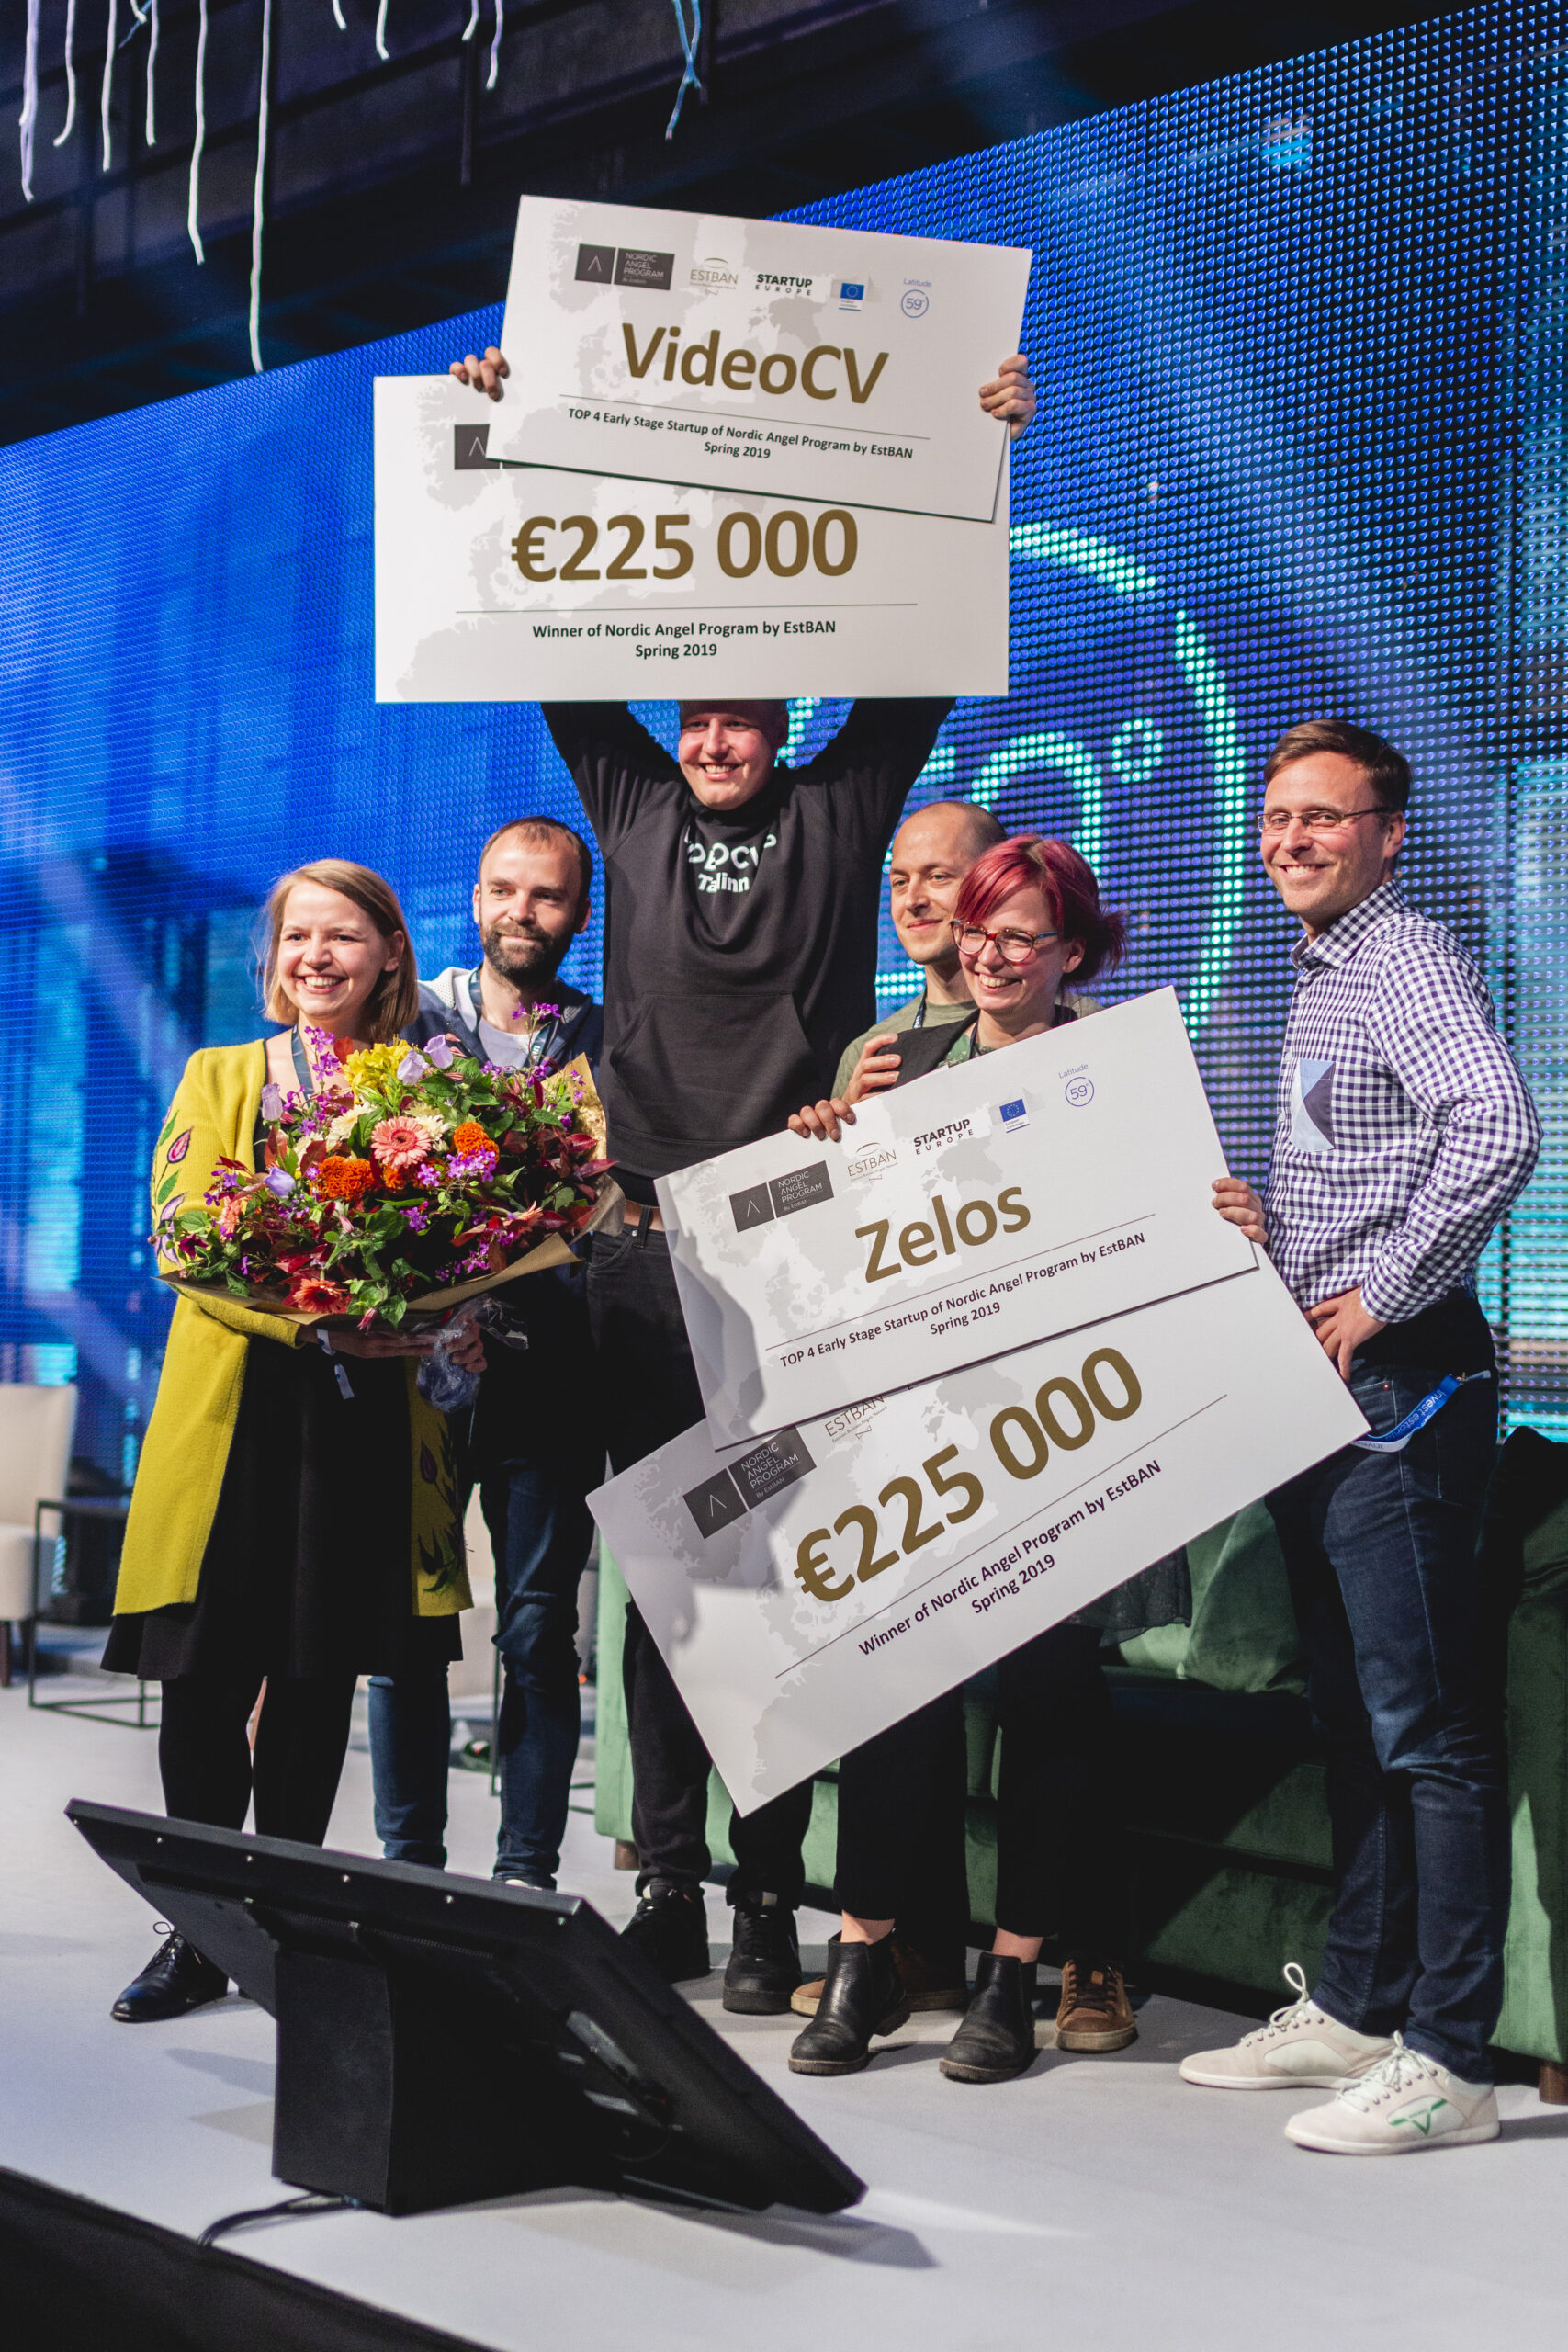 NAP3 announces 2x €225 000 investments to Zelos and VideoCV!